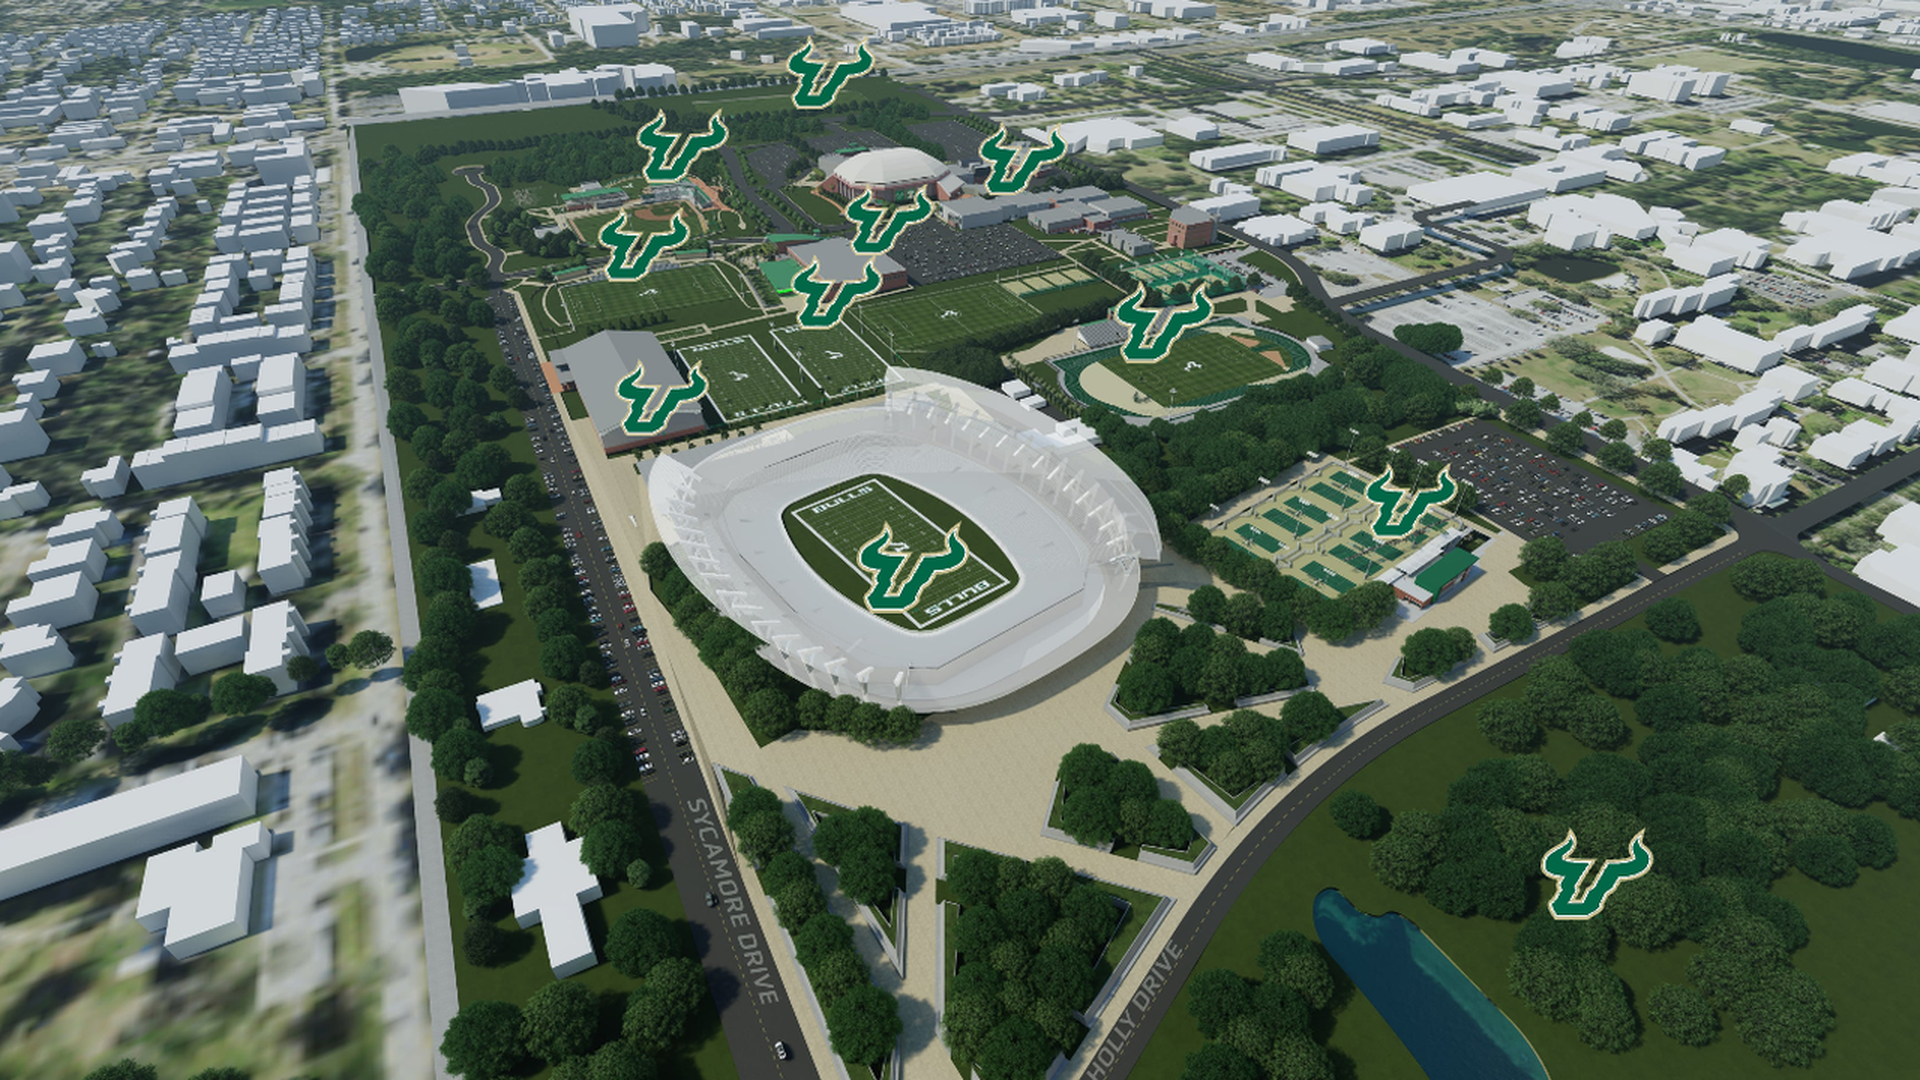 A rendering showing a found football stadium along with several buildings and trees. Several green Us with bullhorns are scattered over the rendering to represent the University of South Florida's athletics logo.